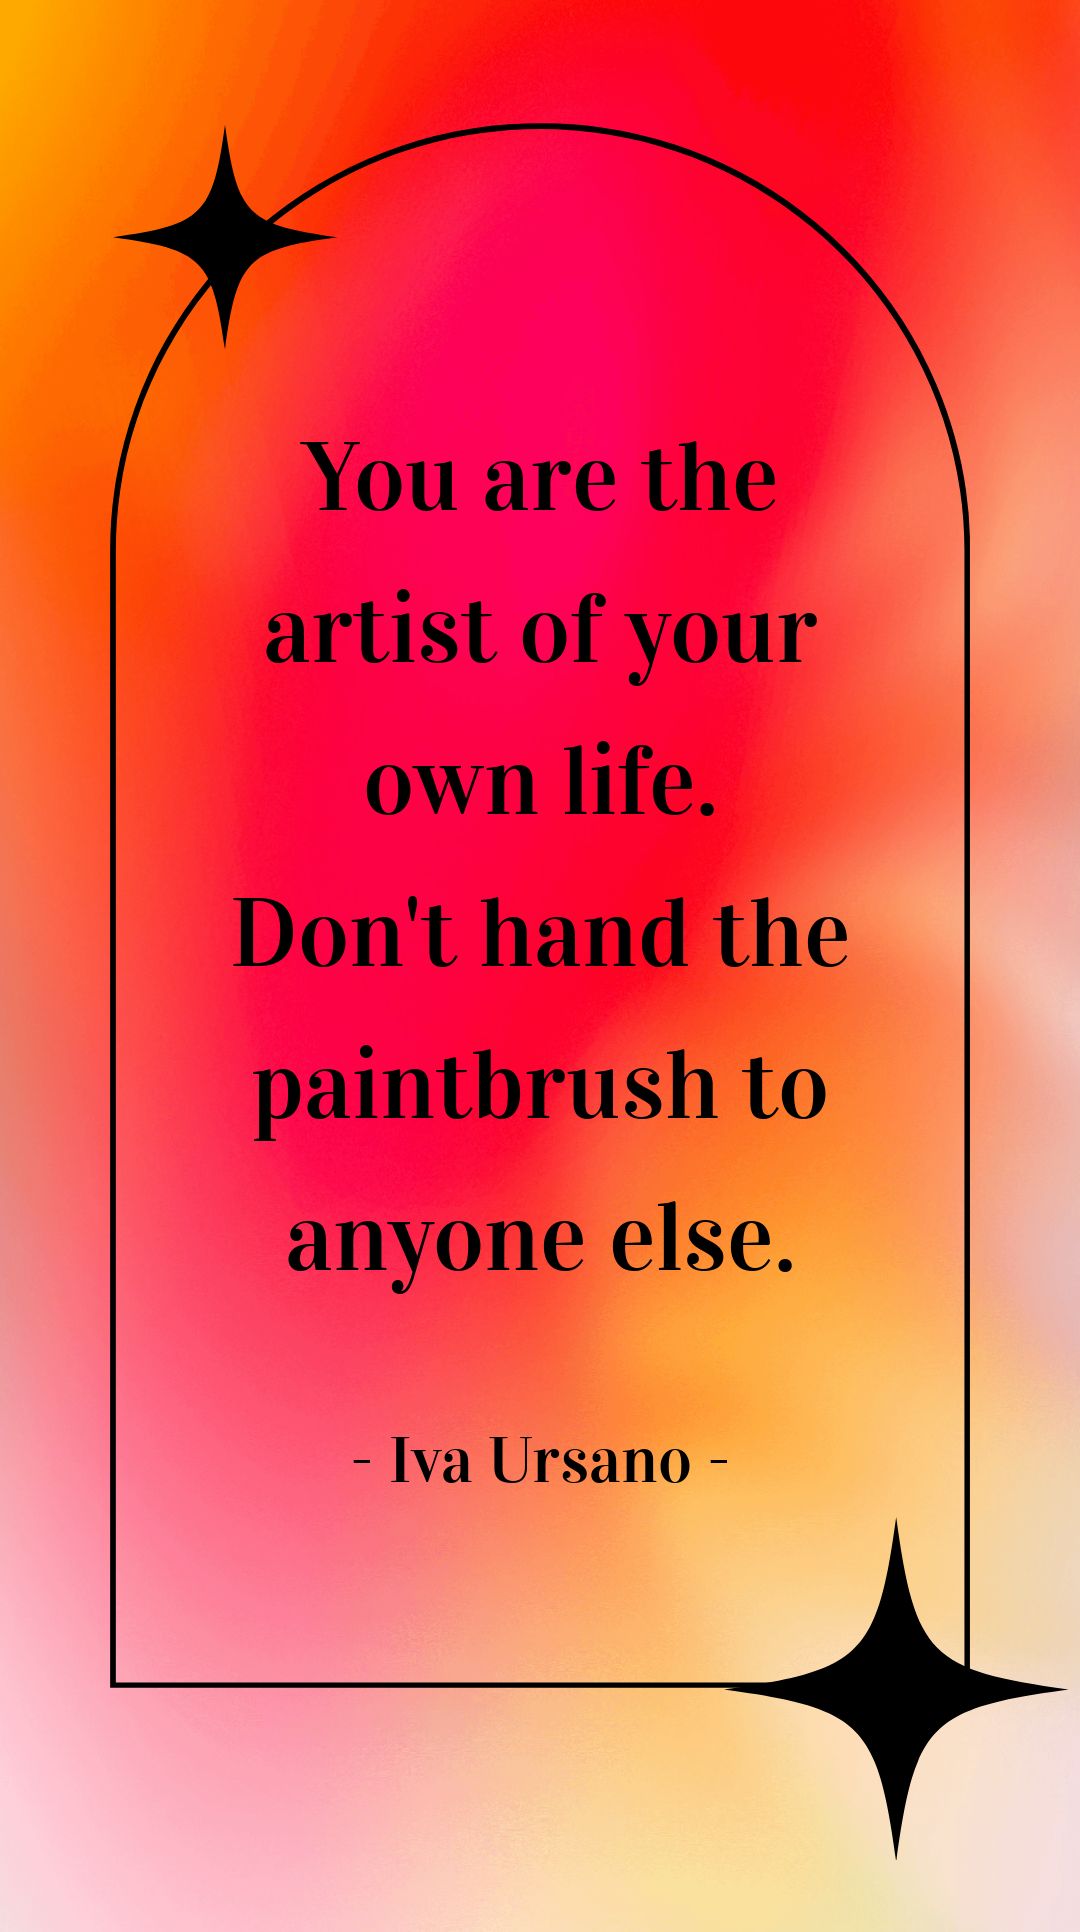 Iva Ursano - You are the artist of your own life, Don't hand the paintbrush to anyone else.